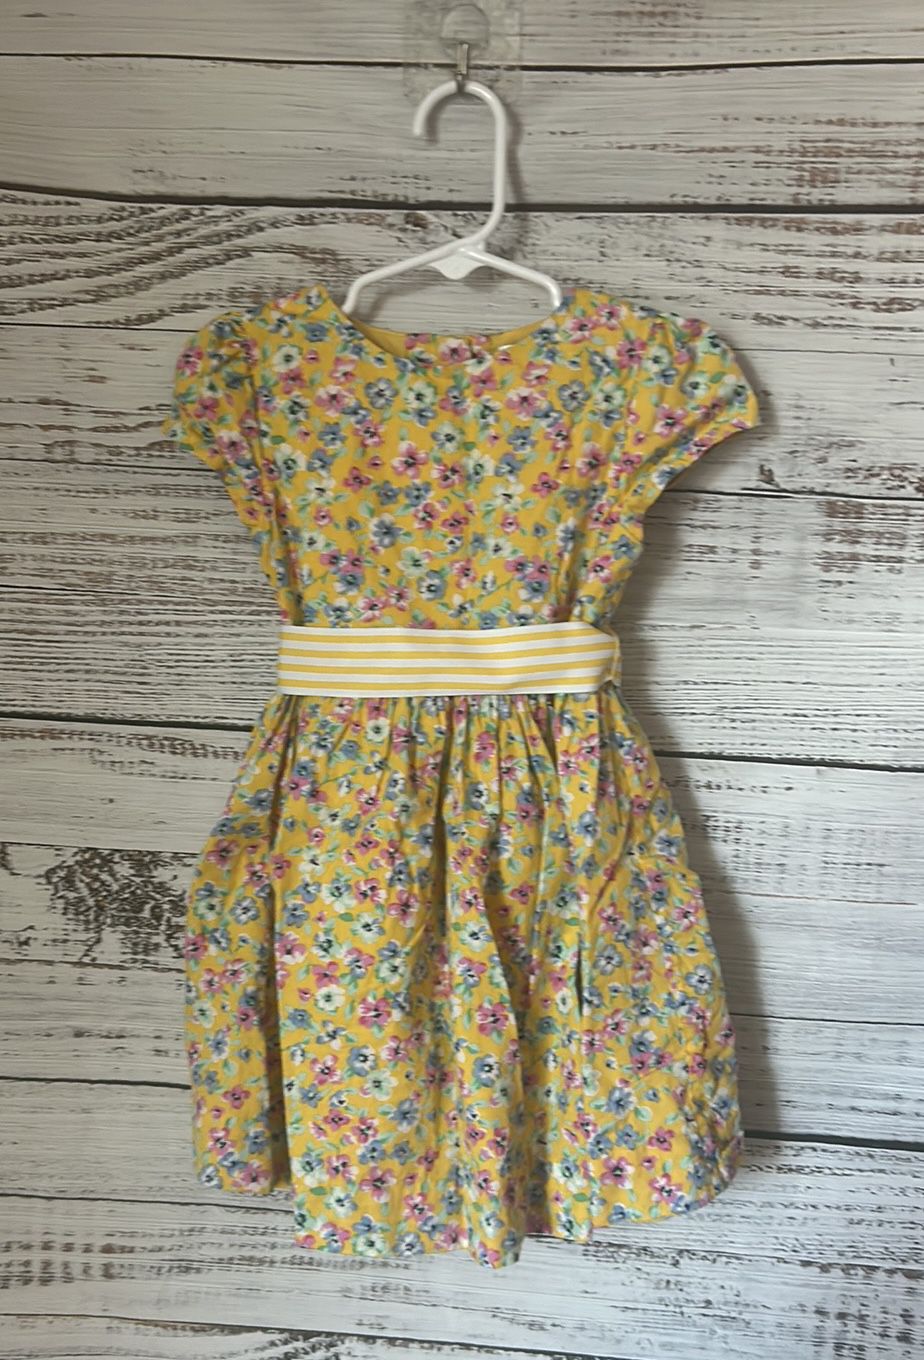 Yellow floral dress from Ralph Lauren with matching bloomers size 24 months